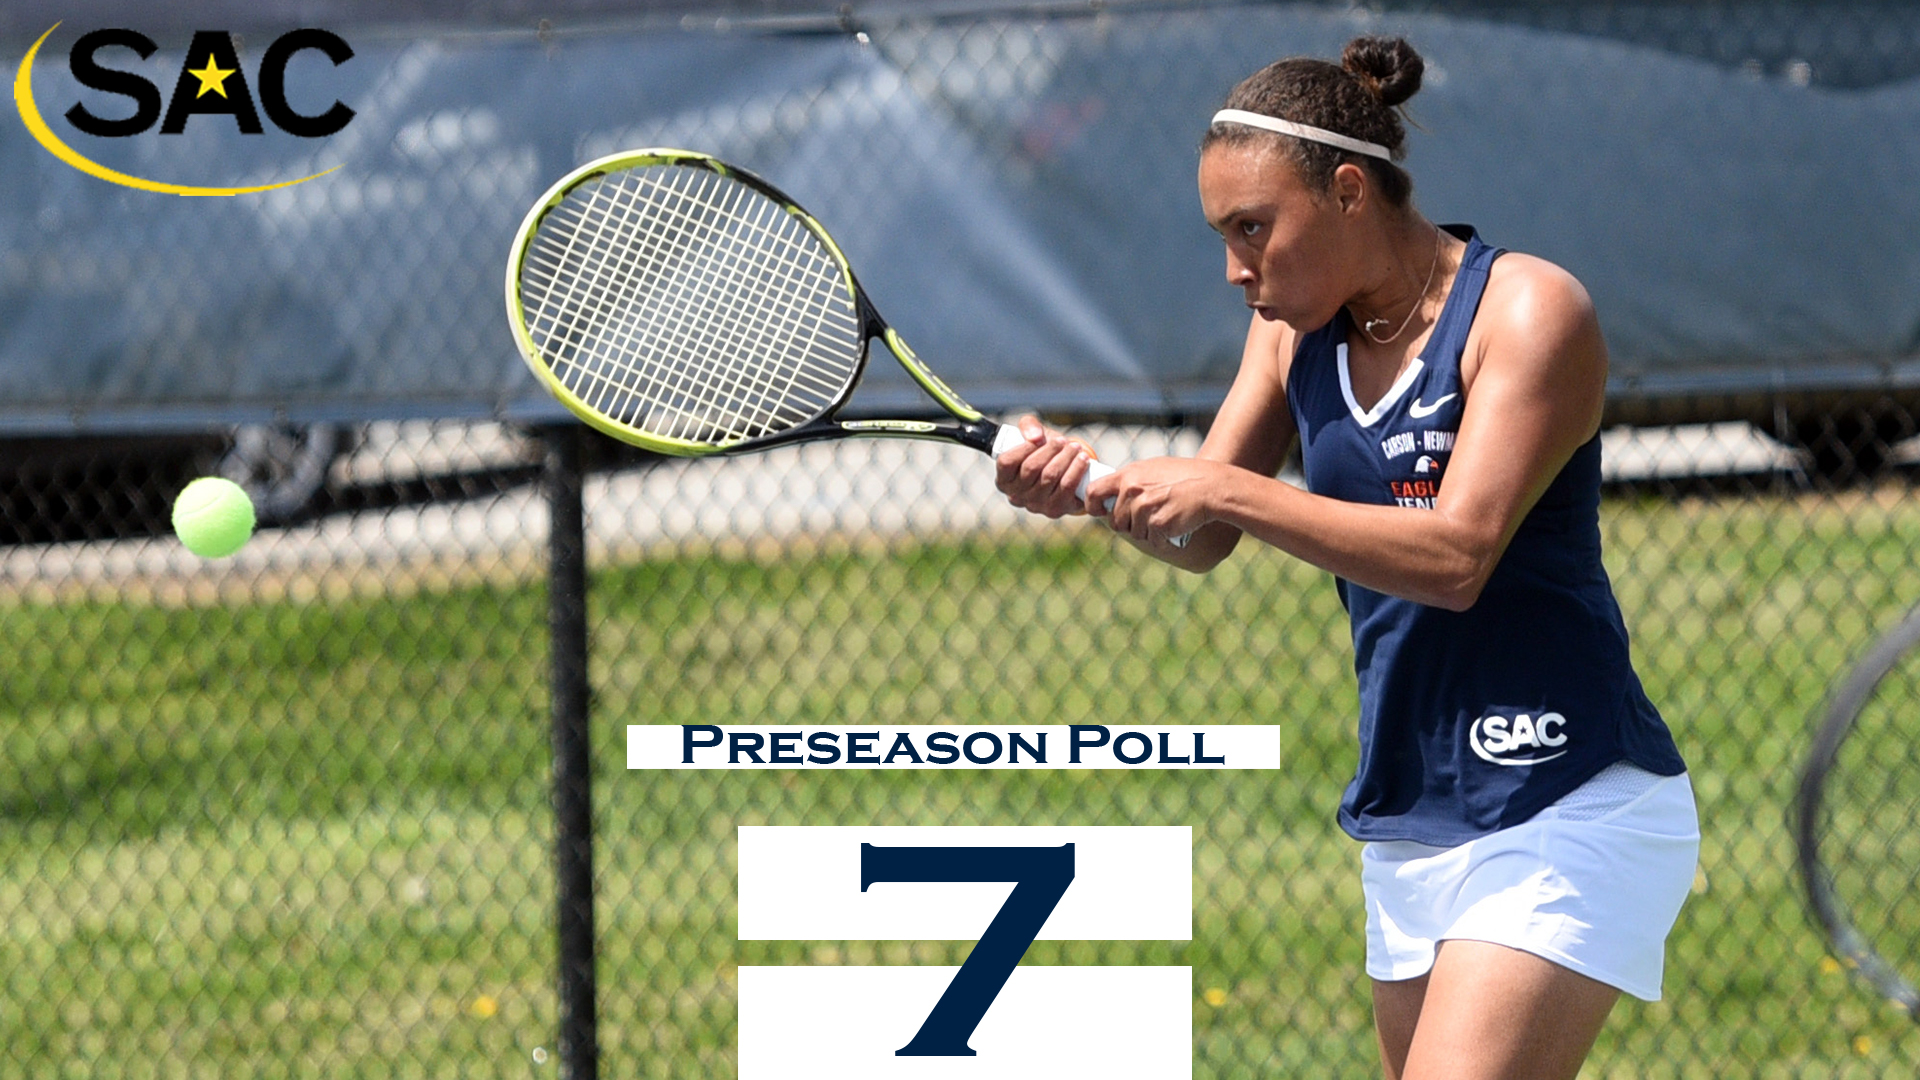 Eagles improve from last season in preseason poll, picked seventh in the SAC